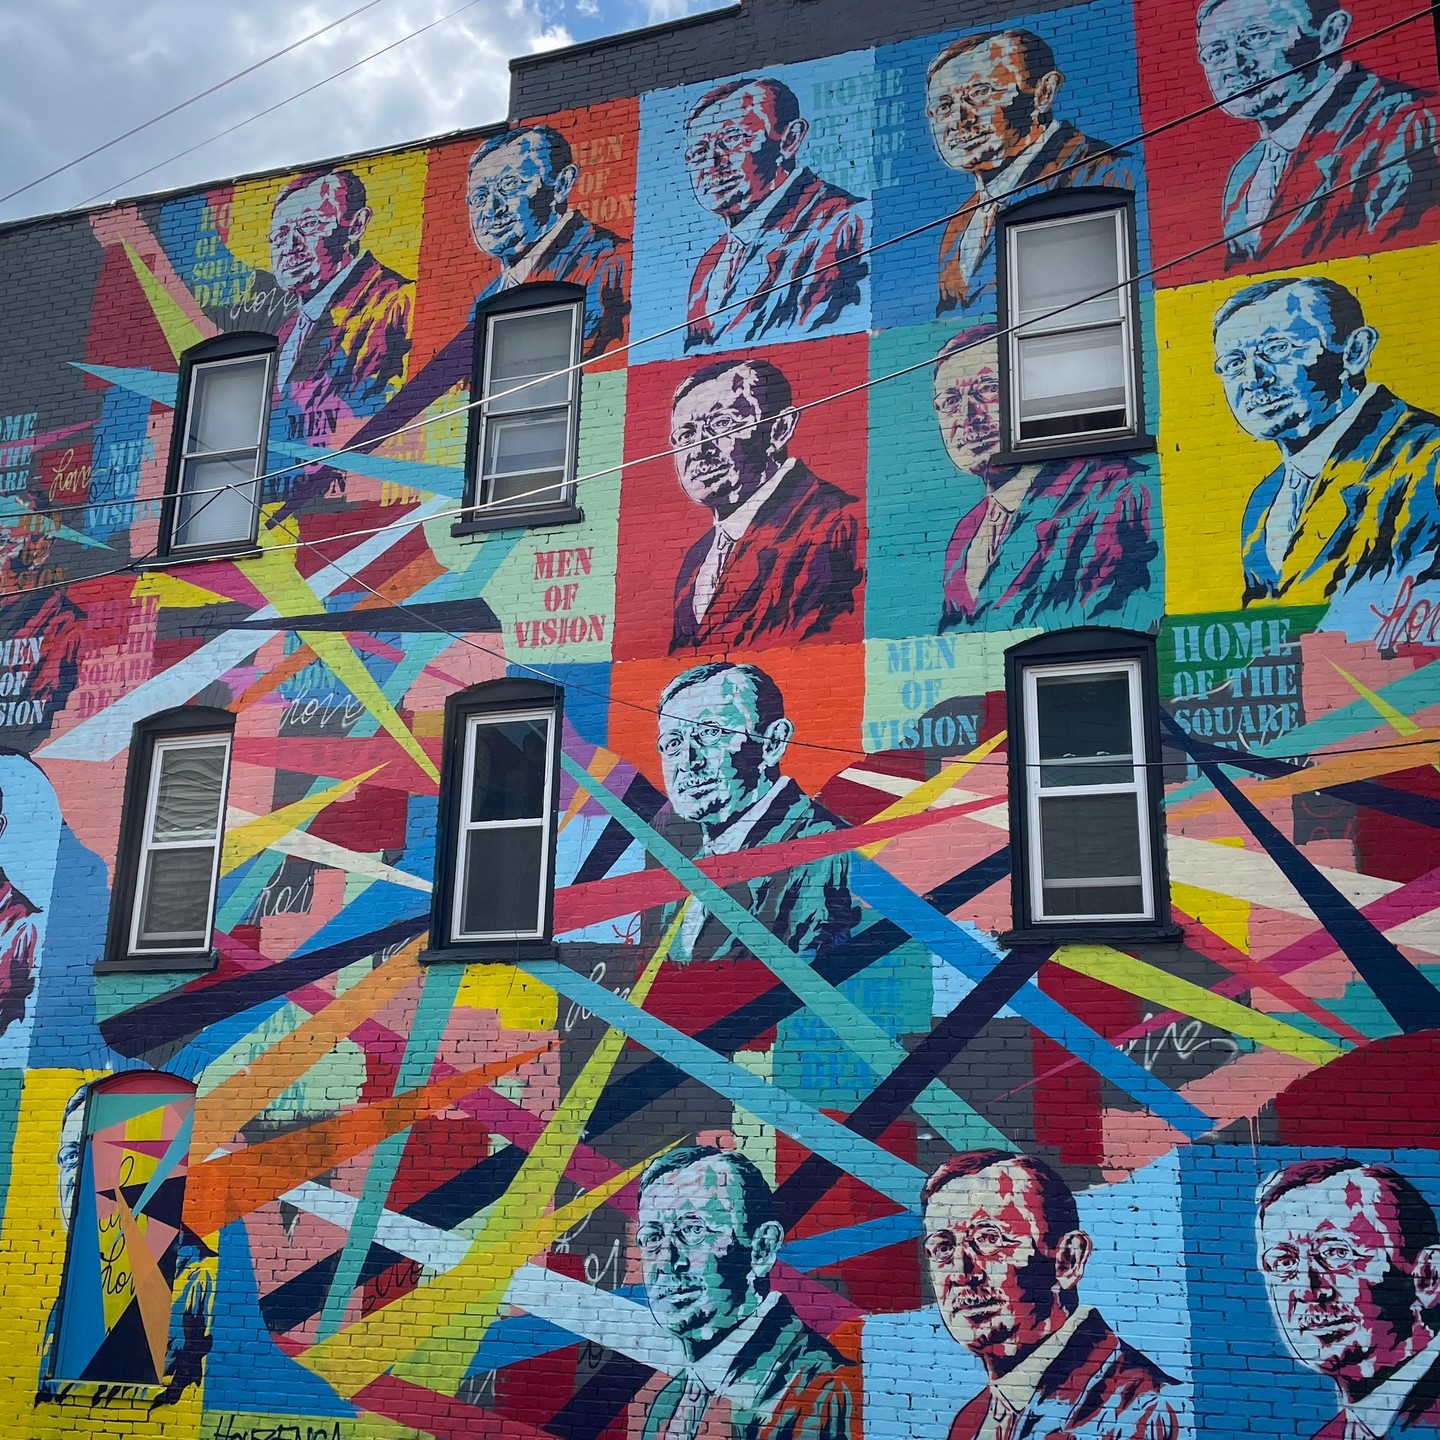 There is a new mural in Johnson City, NY created by Brent Houzenga, an artist from New Orleans. The incredible work consists of a series of portraits of George F. Johnson, President and co-owner of Endicott-Johnson Shoes, and one of the architects of the 'Square Deal'. GFJ saw to it that E-J Shoe workers had homes and other benefits not typically provided by any other company. Johnson City, NY was named for George F, and his legacy lives on in the form of numerous parks, E-J homes, and carousels he helped to provide. Now, this beautiful mural also helps his memory live on. The mural is located at 17 Broad Street, near the intersection with Main Street. Learn more about the artist on his site: https://www.houzenga.com and visit him on Instagram @houzenga .